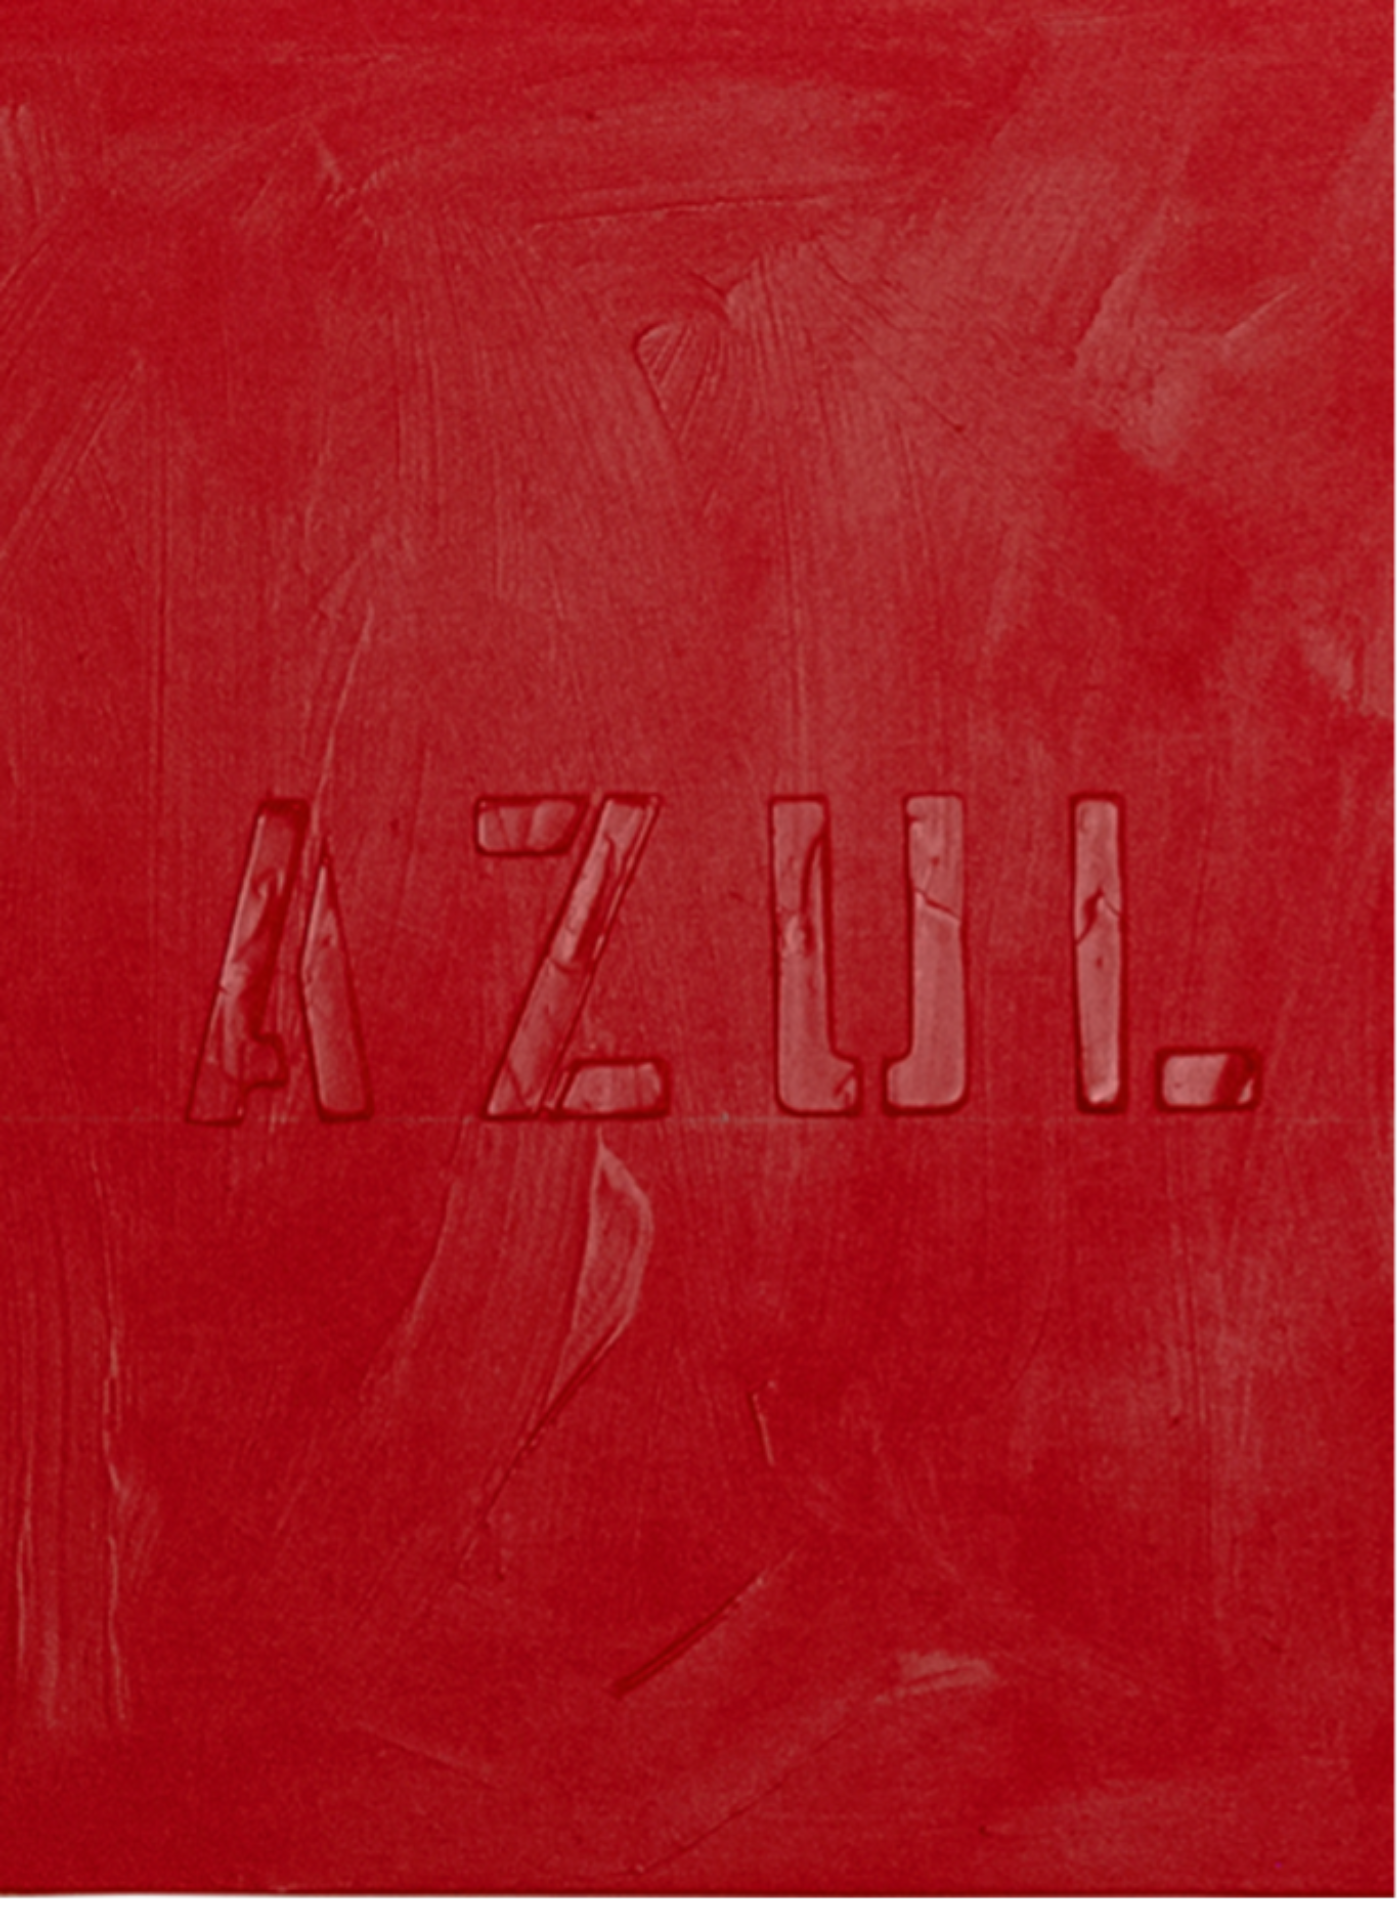 Painting of a flat, red background with the Spanish word for blue (azul) written on it